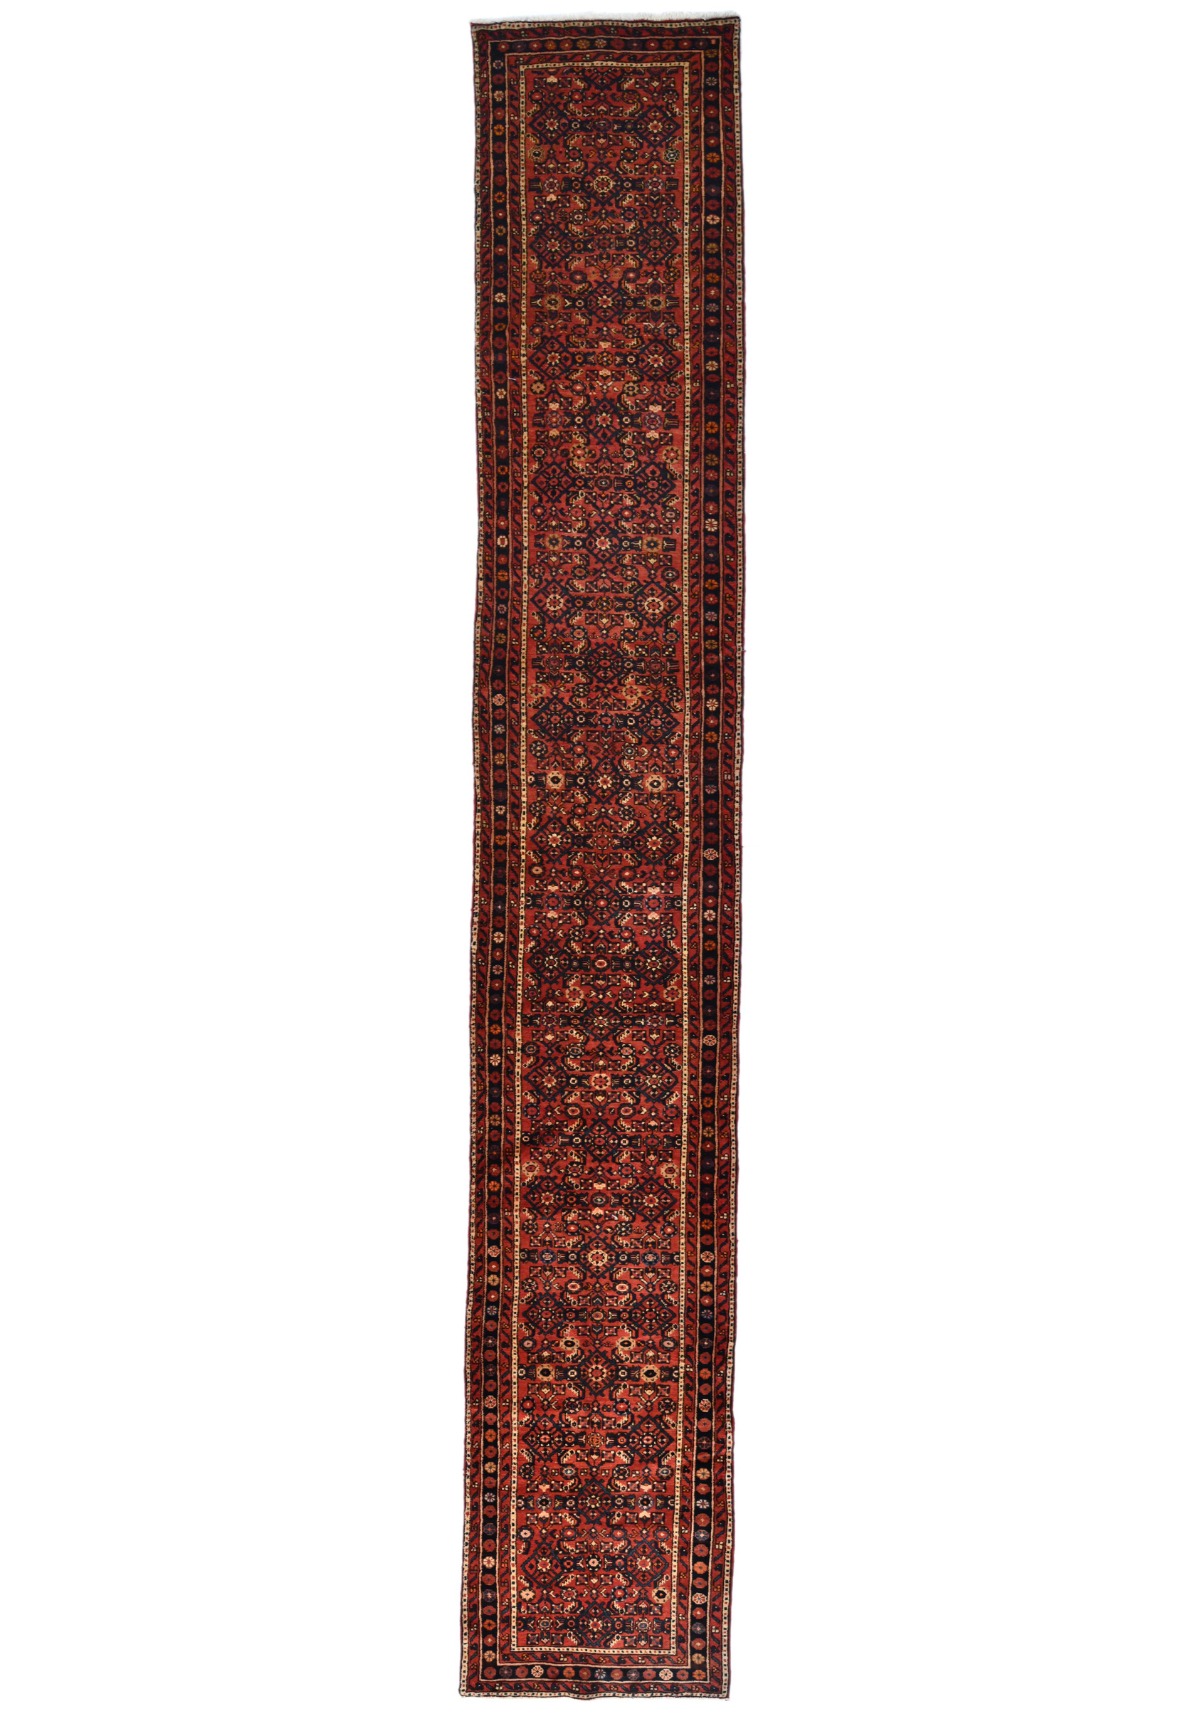 Vintage Rusty Red Tribal 3X17 Hossainabad Persian Runner Rug